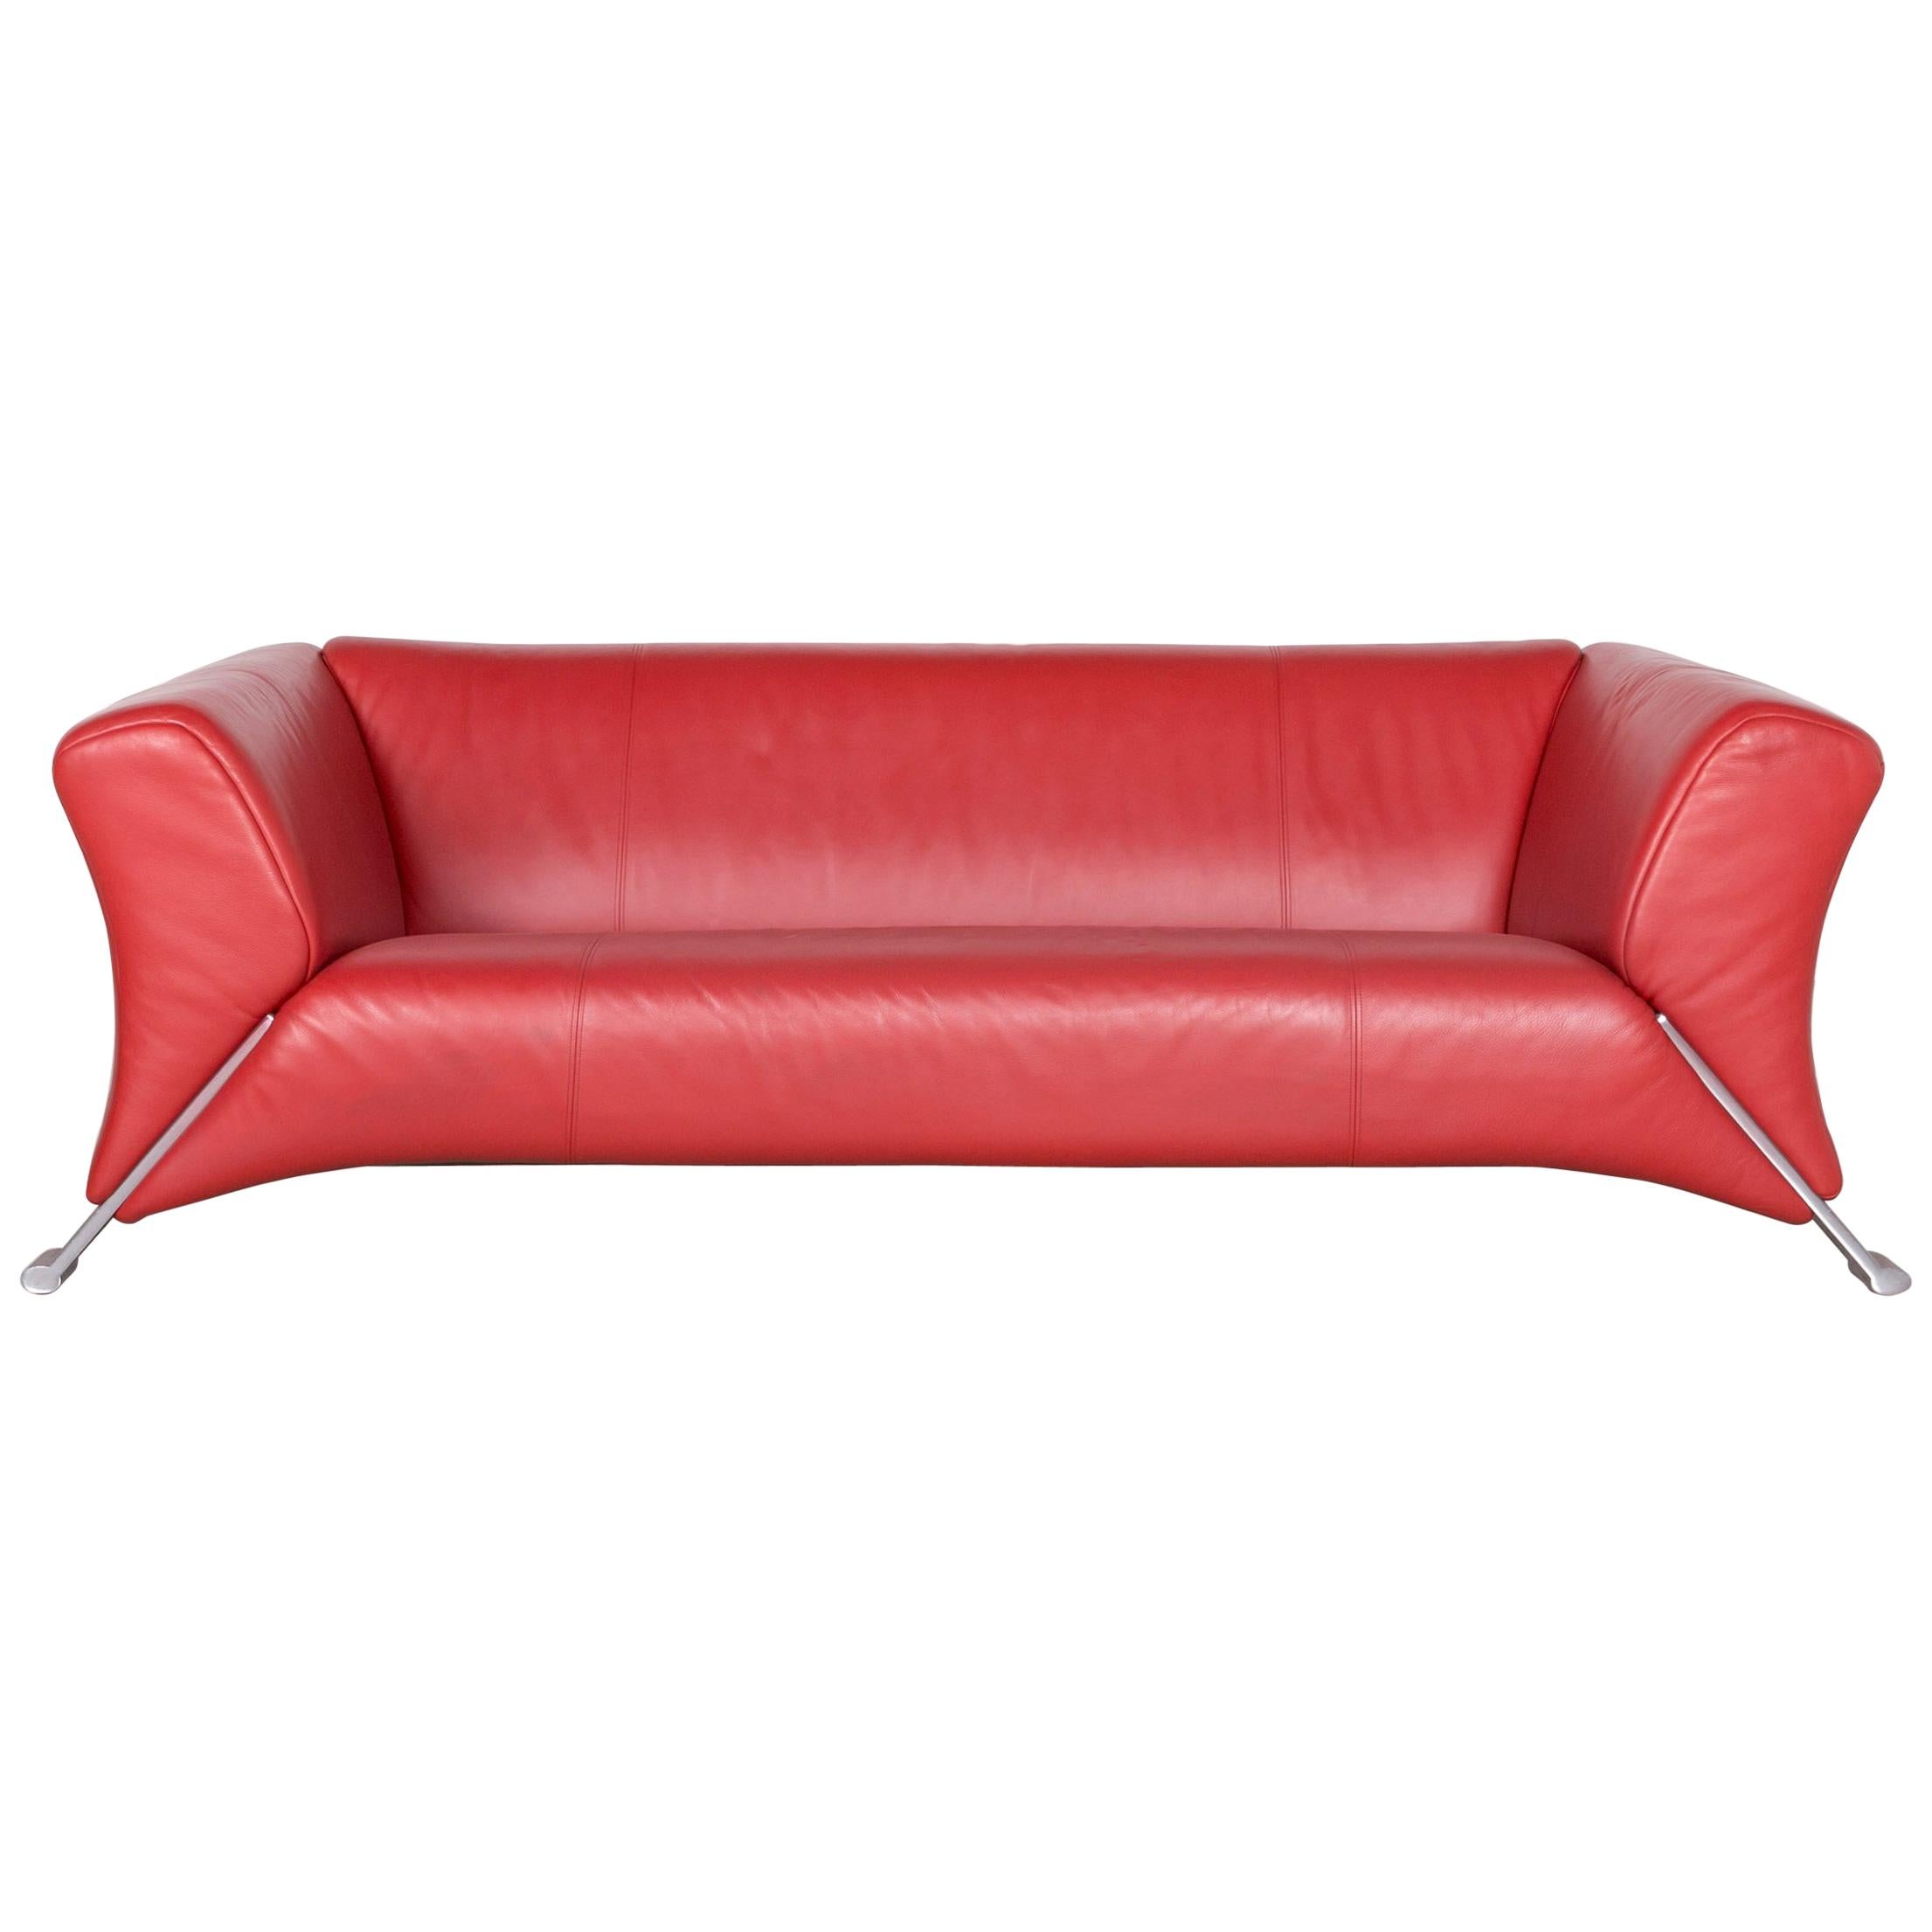 Rolf Benz 322 Designer Sofa Red Three-Seat Leather Couch